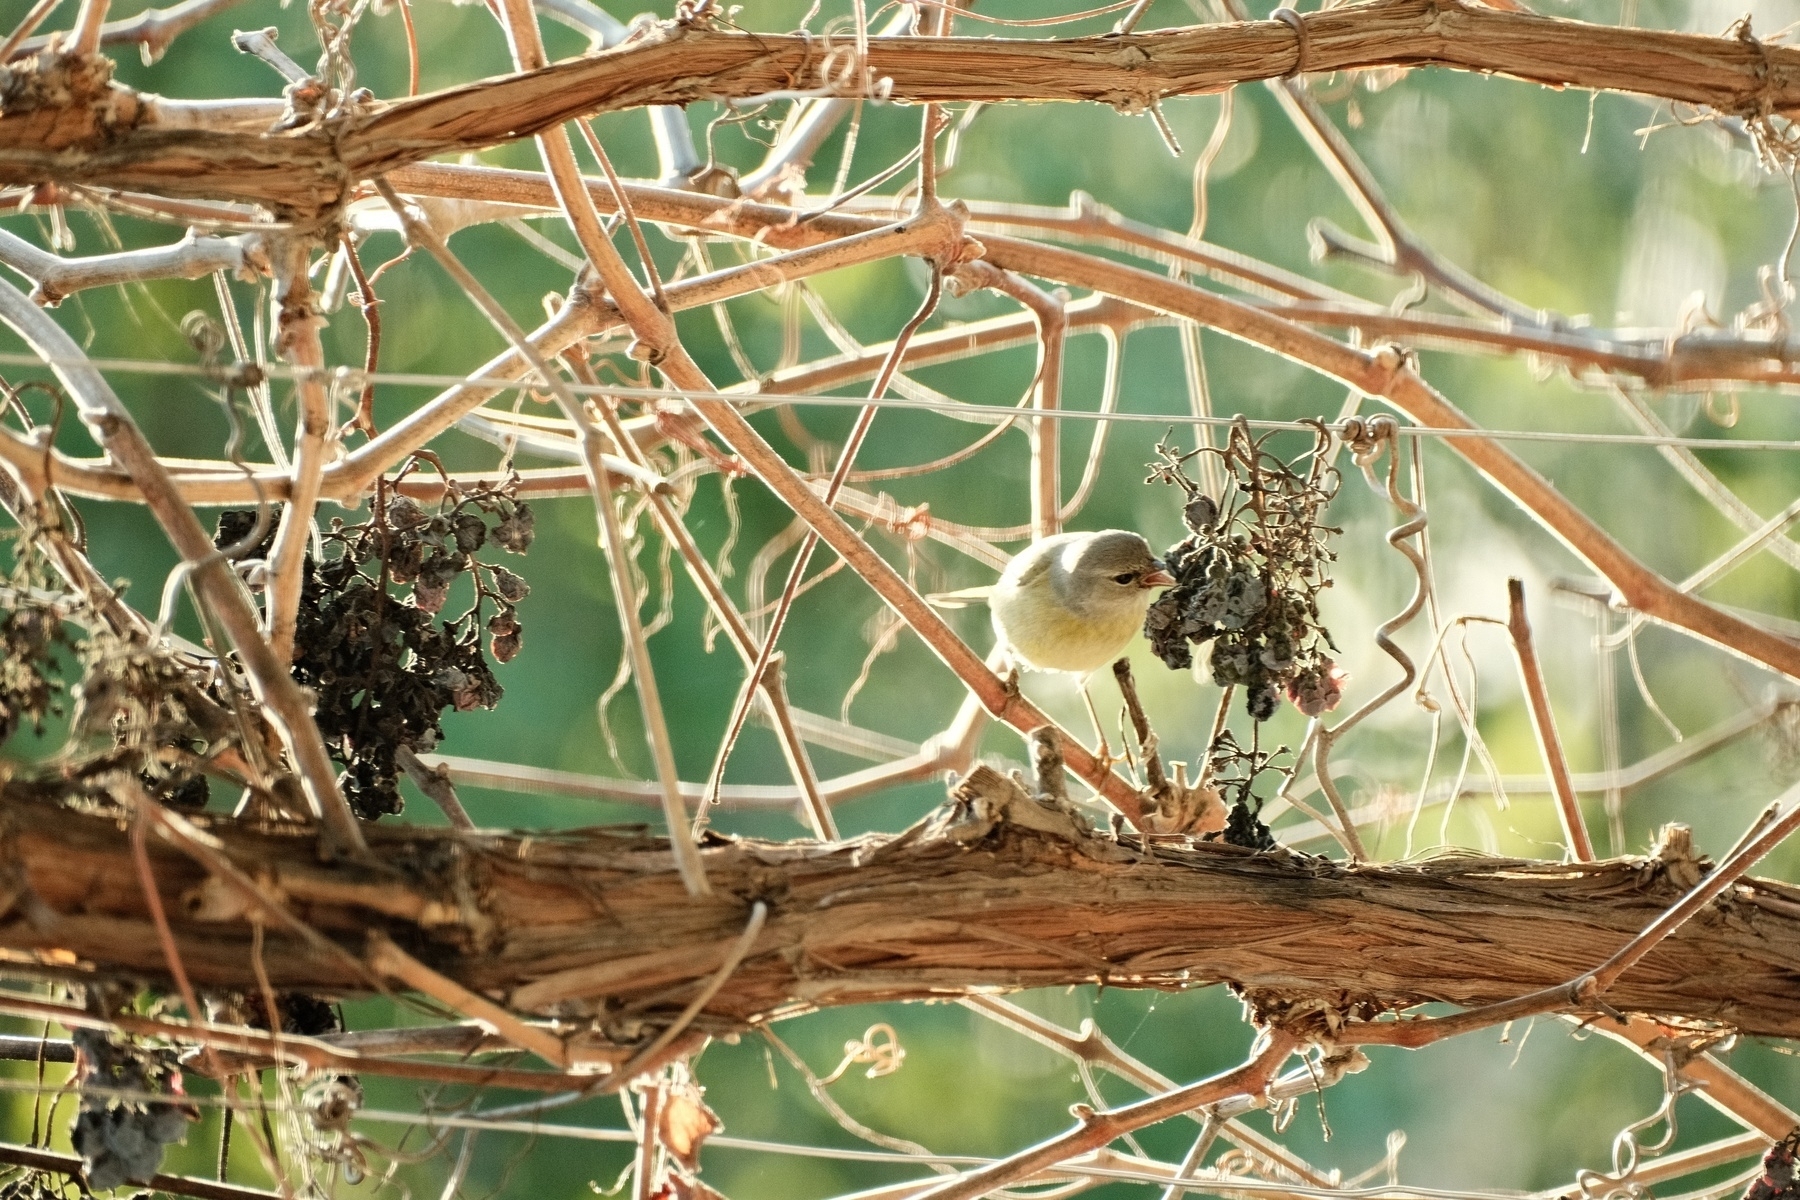 An Orange Crowned Warbler perched on a dormant grape vine, beak agape, lunging toward a dried up grape cluster. The warbler looks light yellow. 